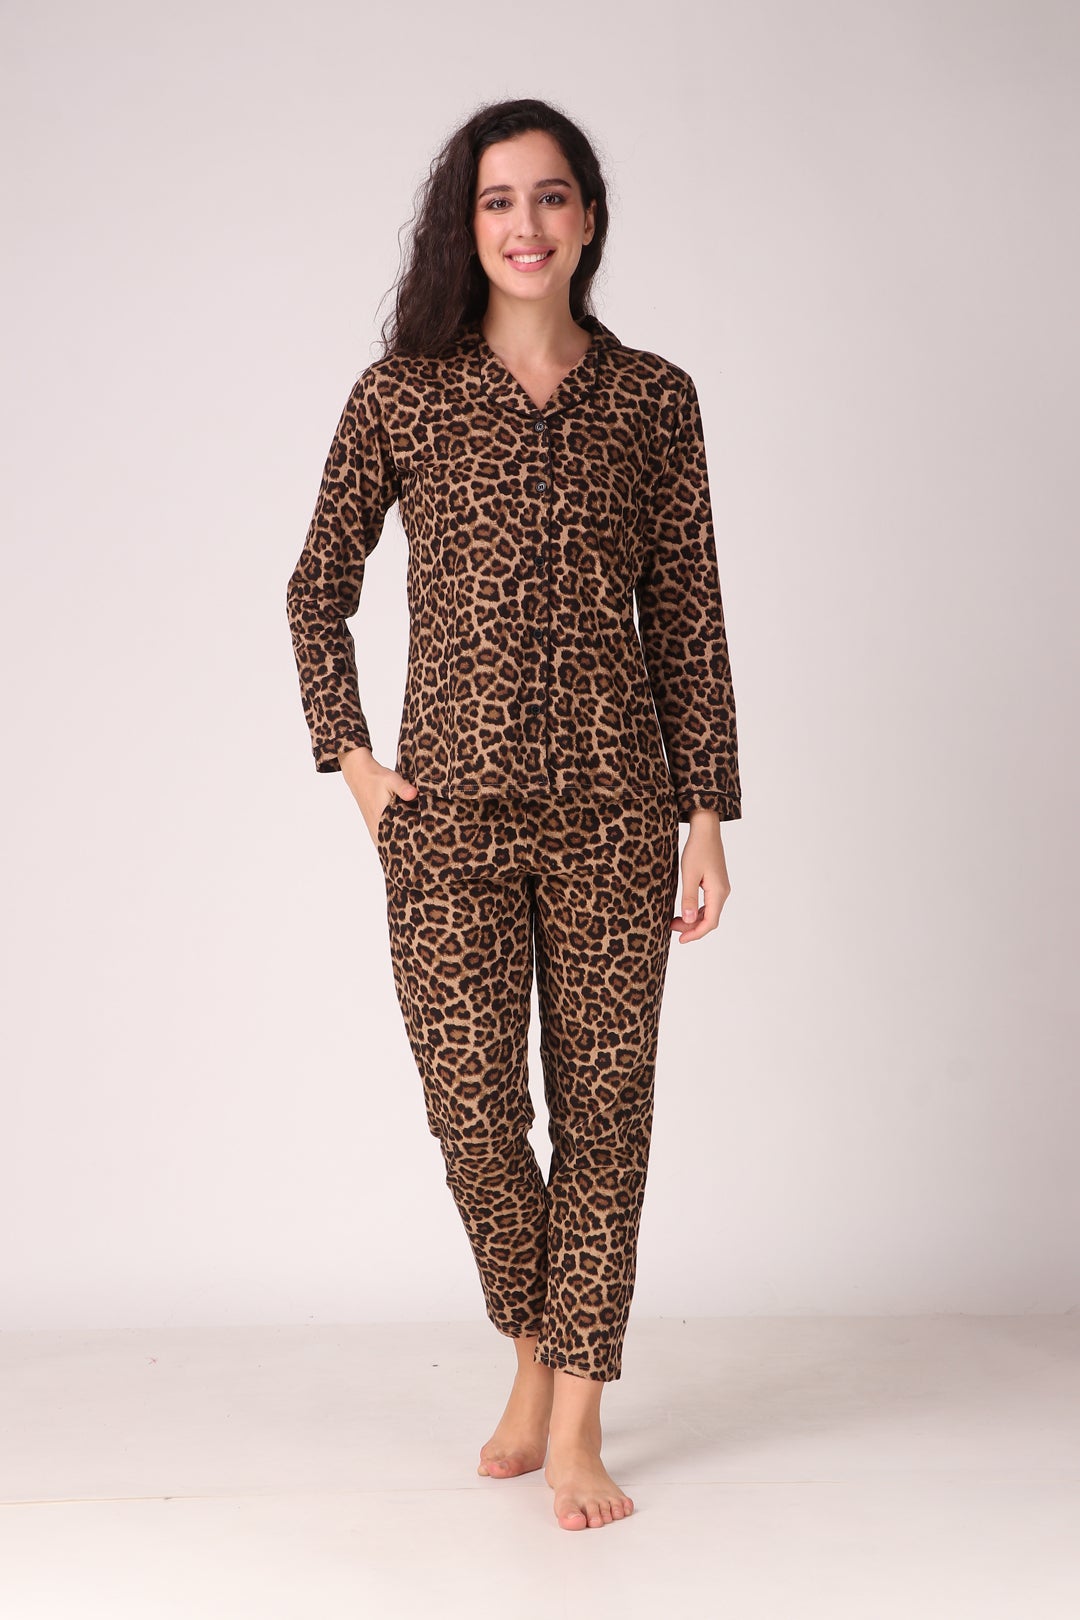 Sexy Leopard Printed Night Suit for| Alibaba.com